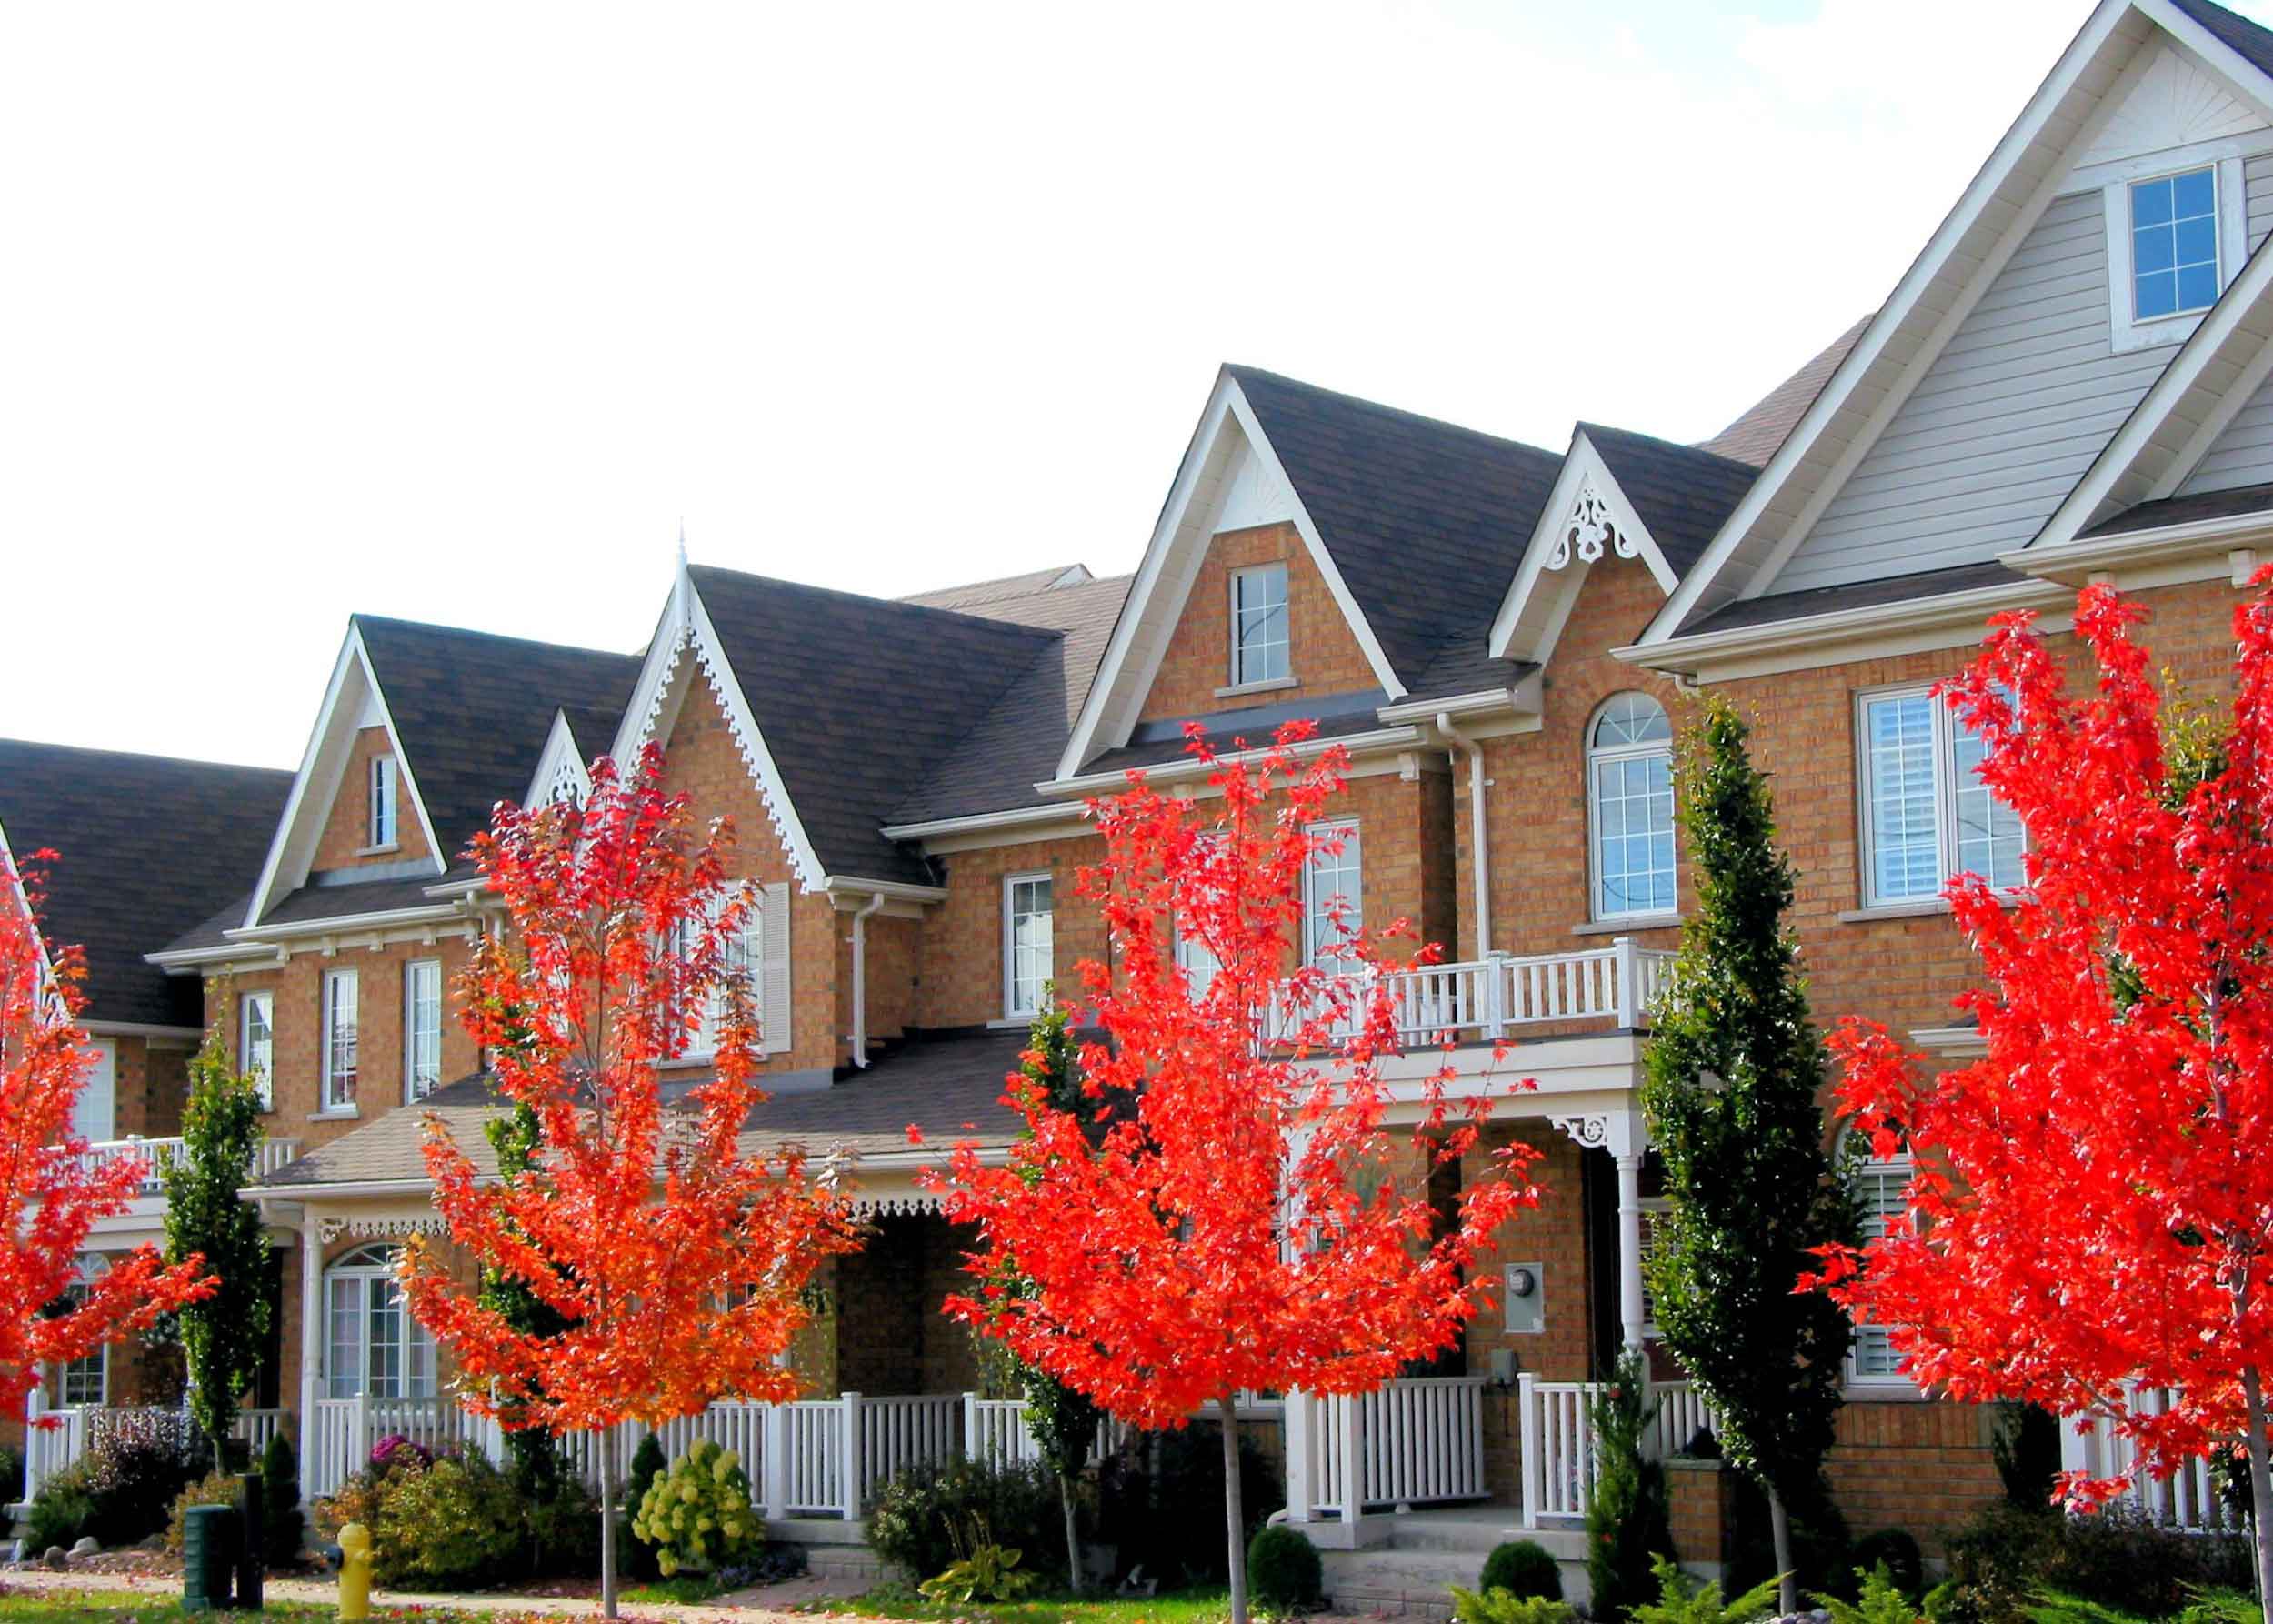 Row of houses with trees with red leaves in front of them